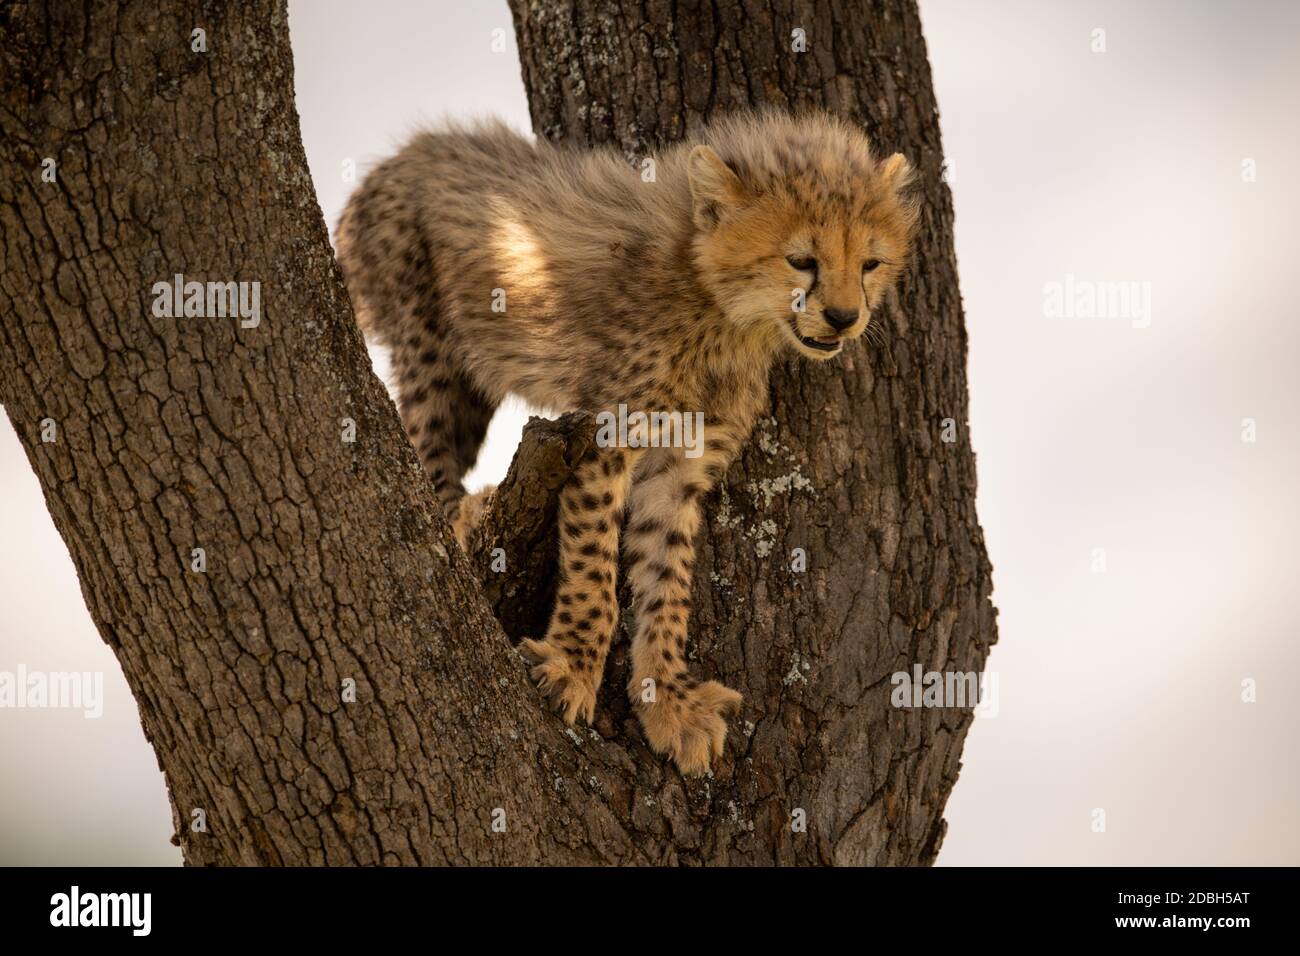 Cheetah cub standing in fork of tree Stock Photo